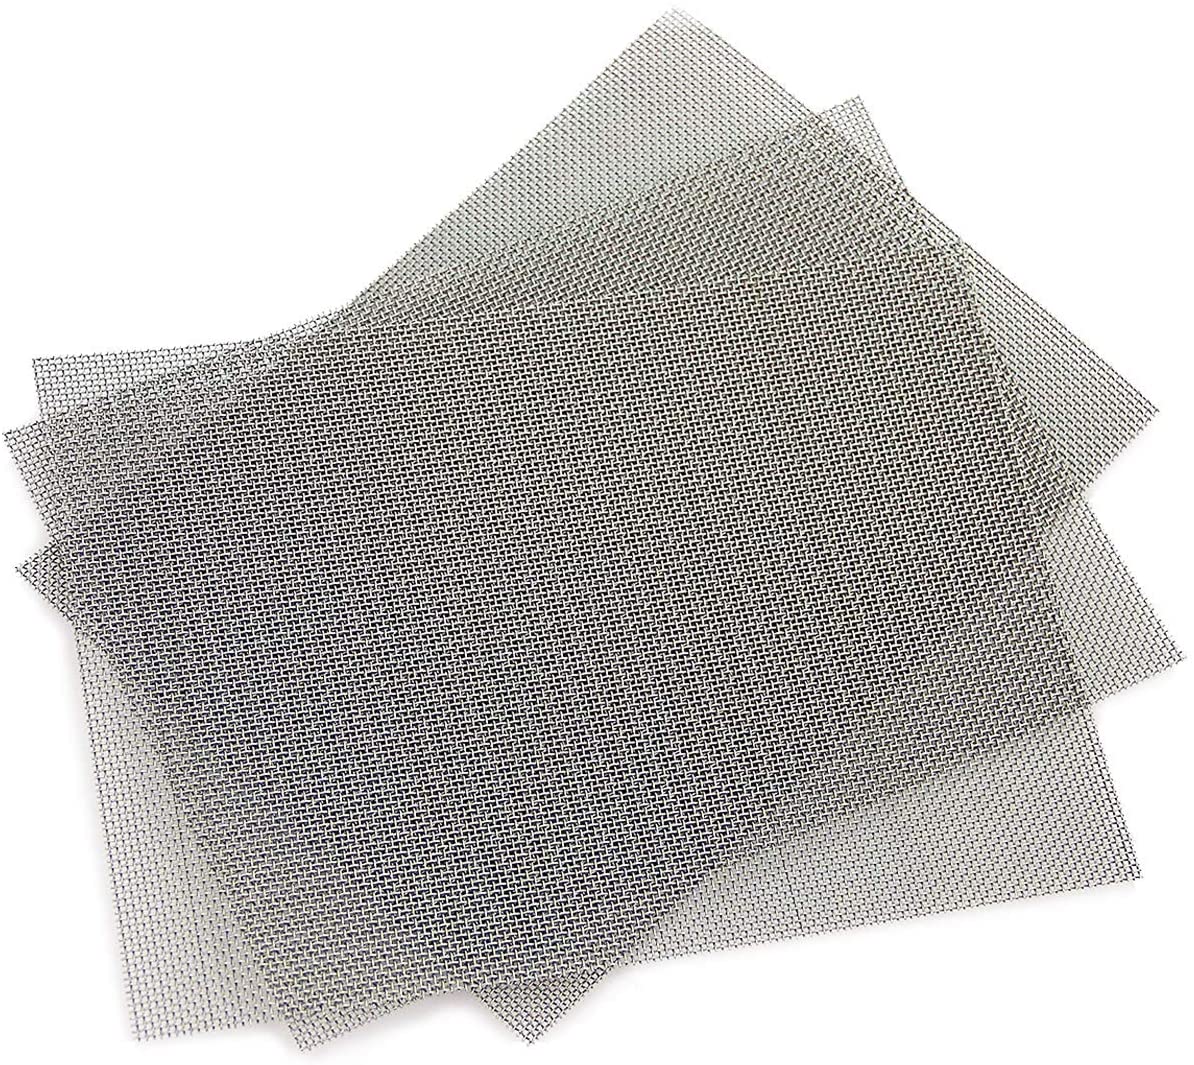 Ss304 Woven Stainless Steel Wire Mesh